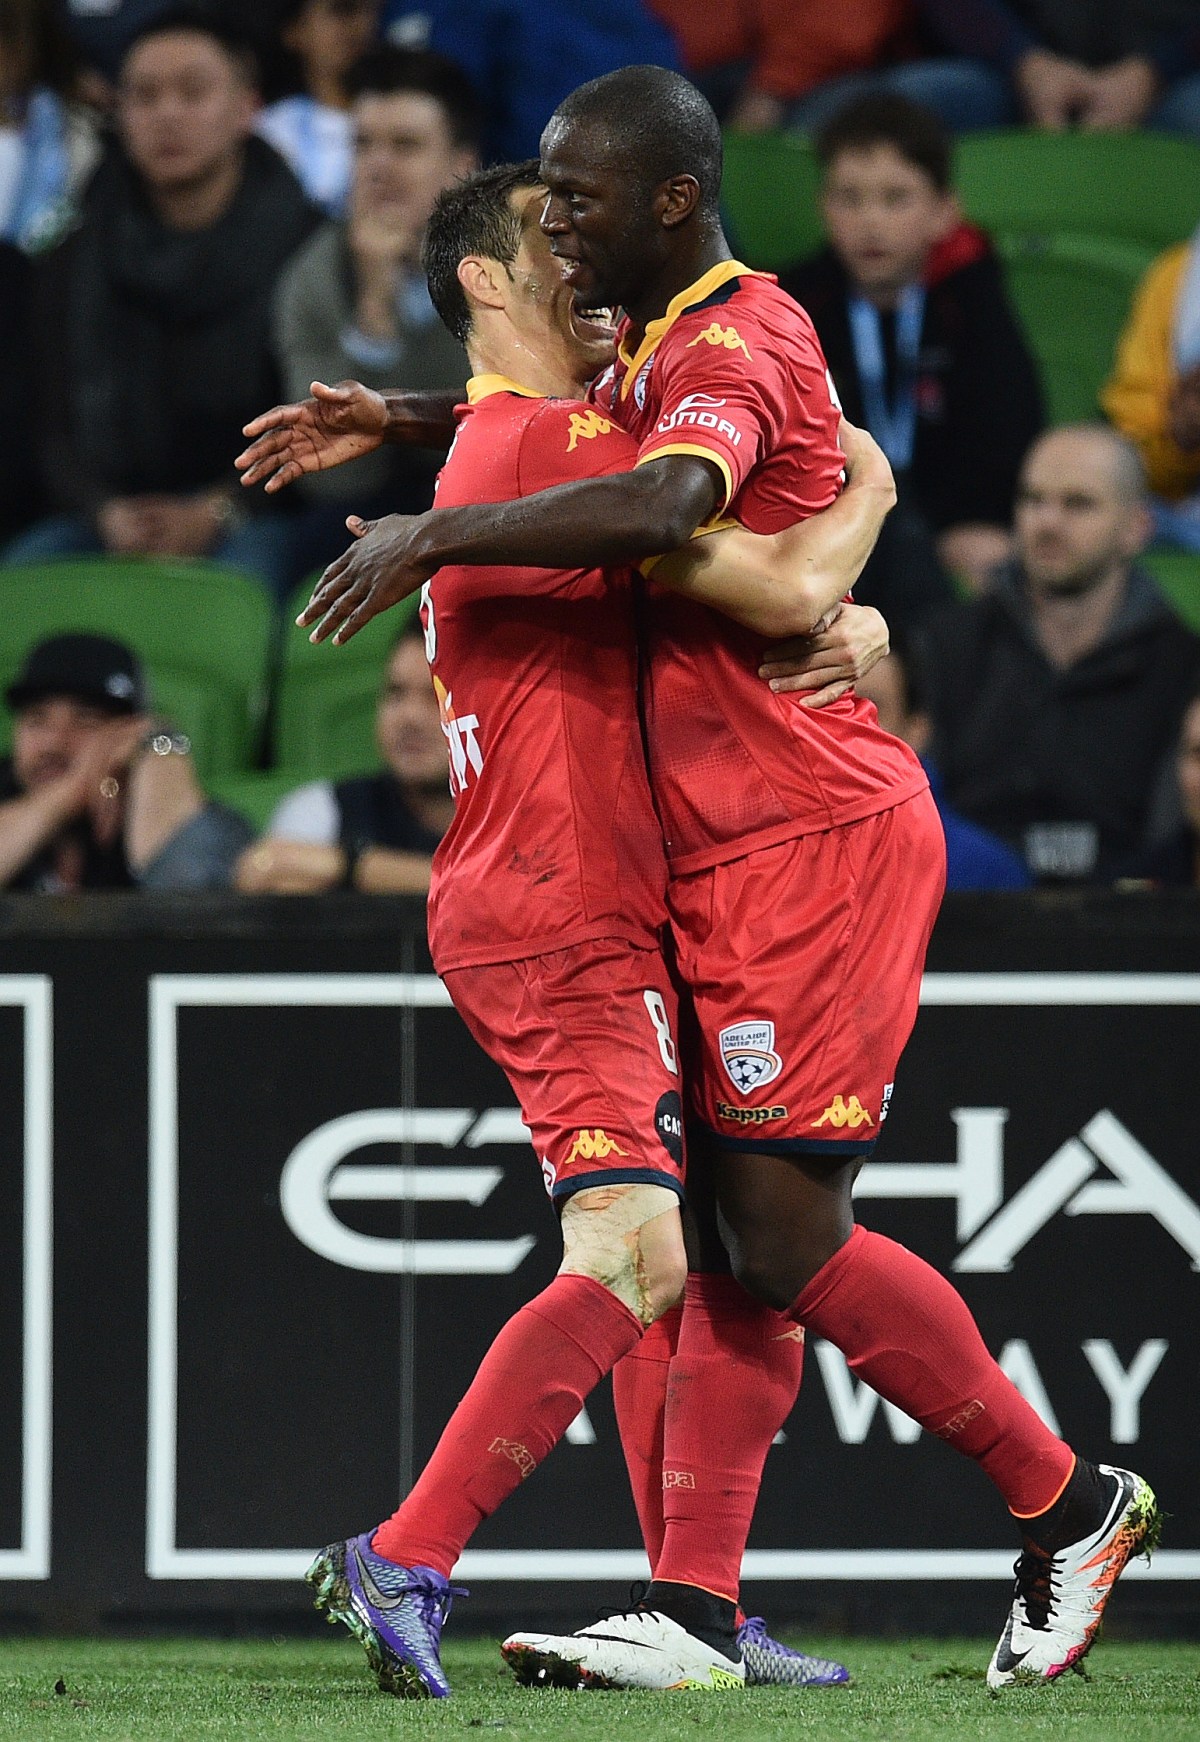 Adelaide United players Isaias (left) and Bruce Djite react after scoring a goal against Melbourne City in round 27 of the A-League at AAMI Park in Melbourne, Friday, April 8, 2016. (AAP Image/Julian Smith) NO ARCHIVING, EDITORIAL USE ONLY